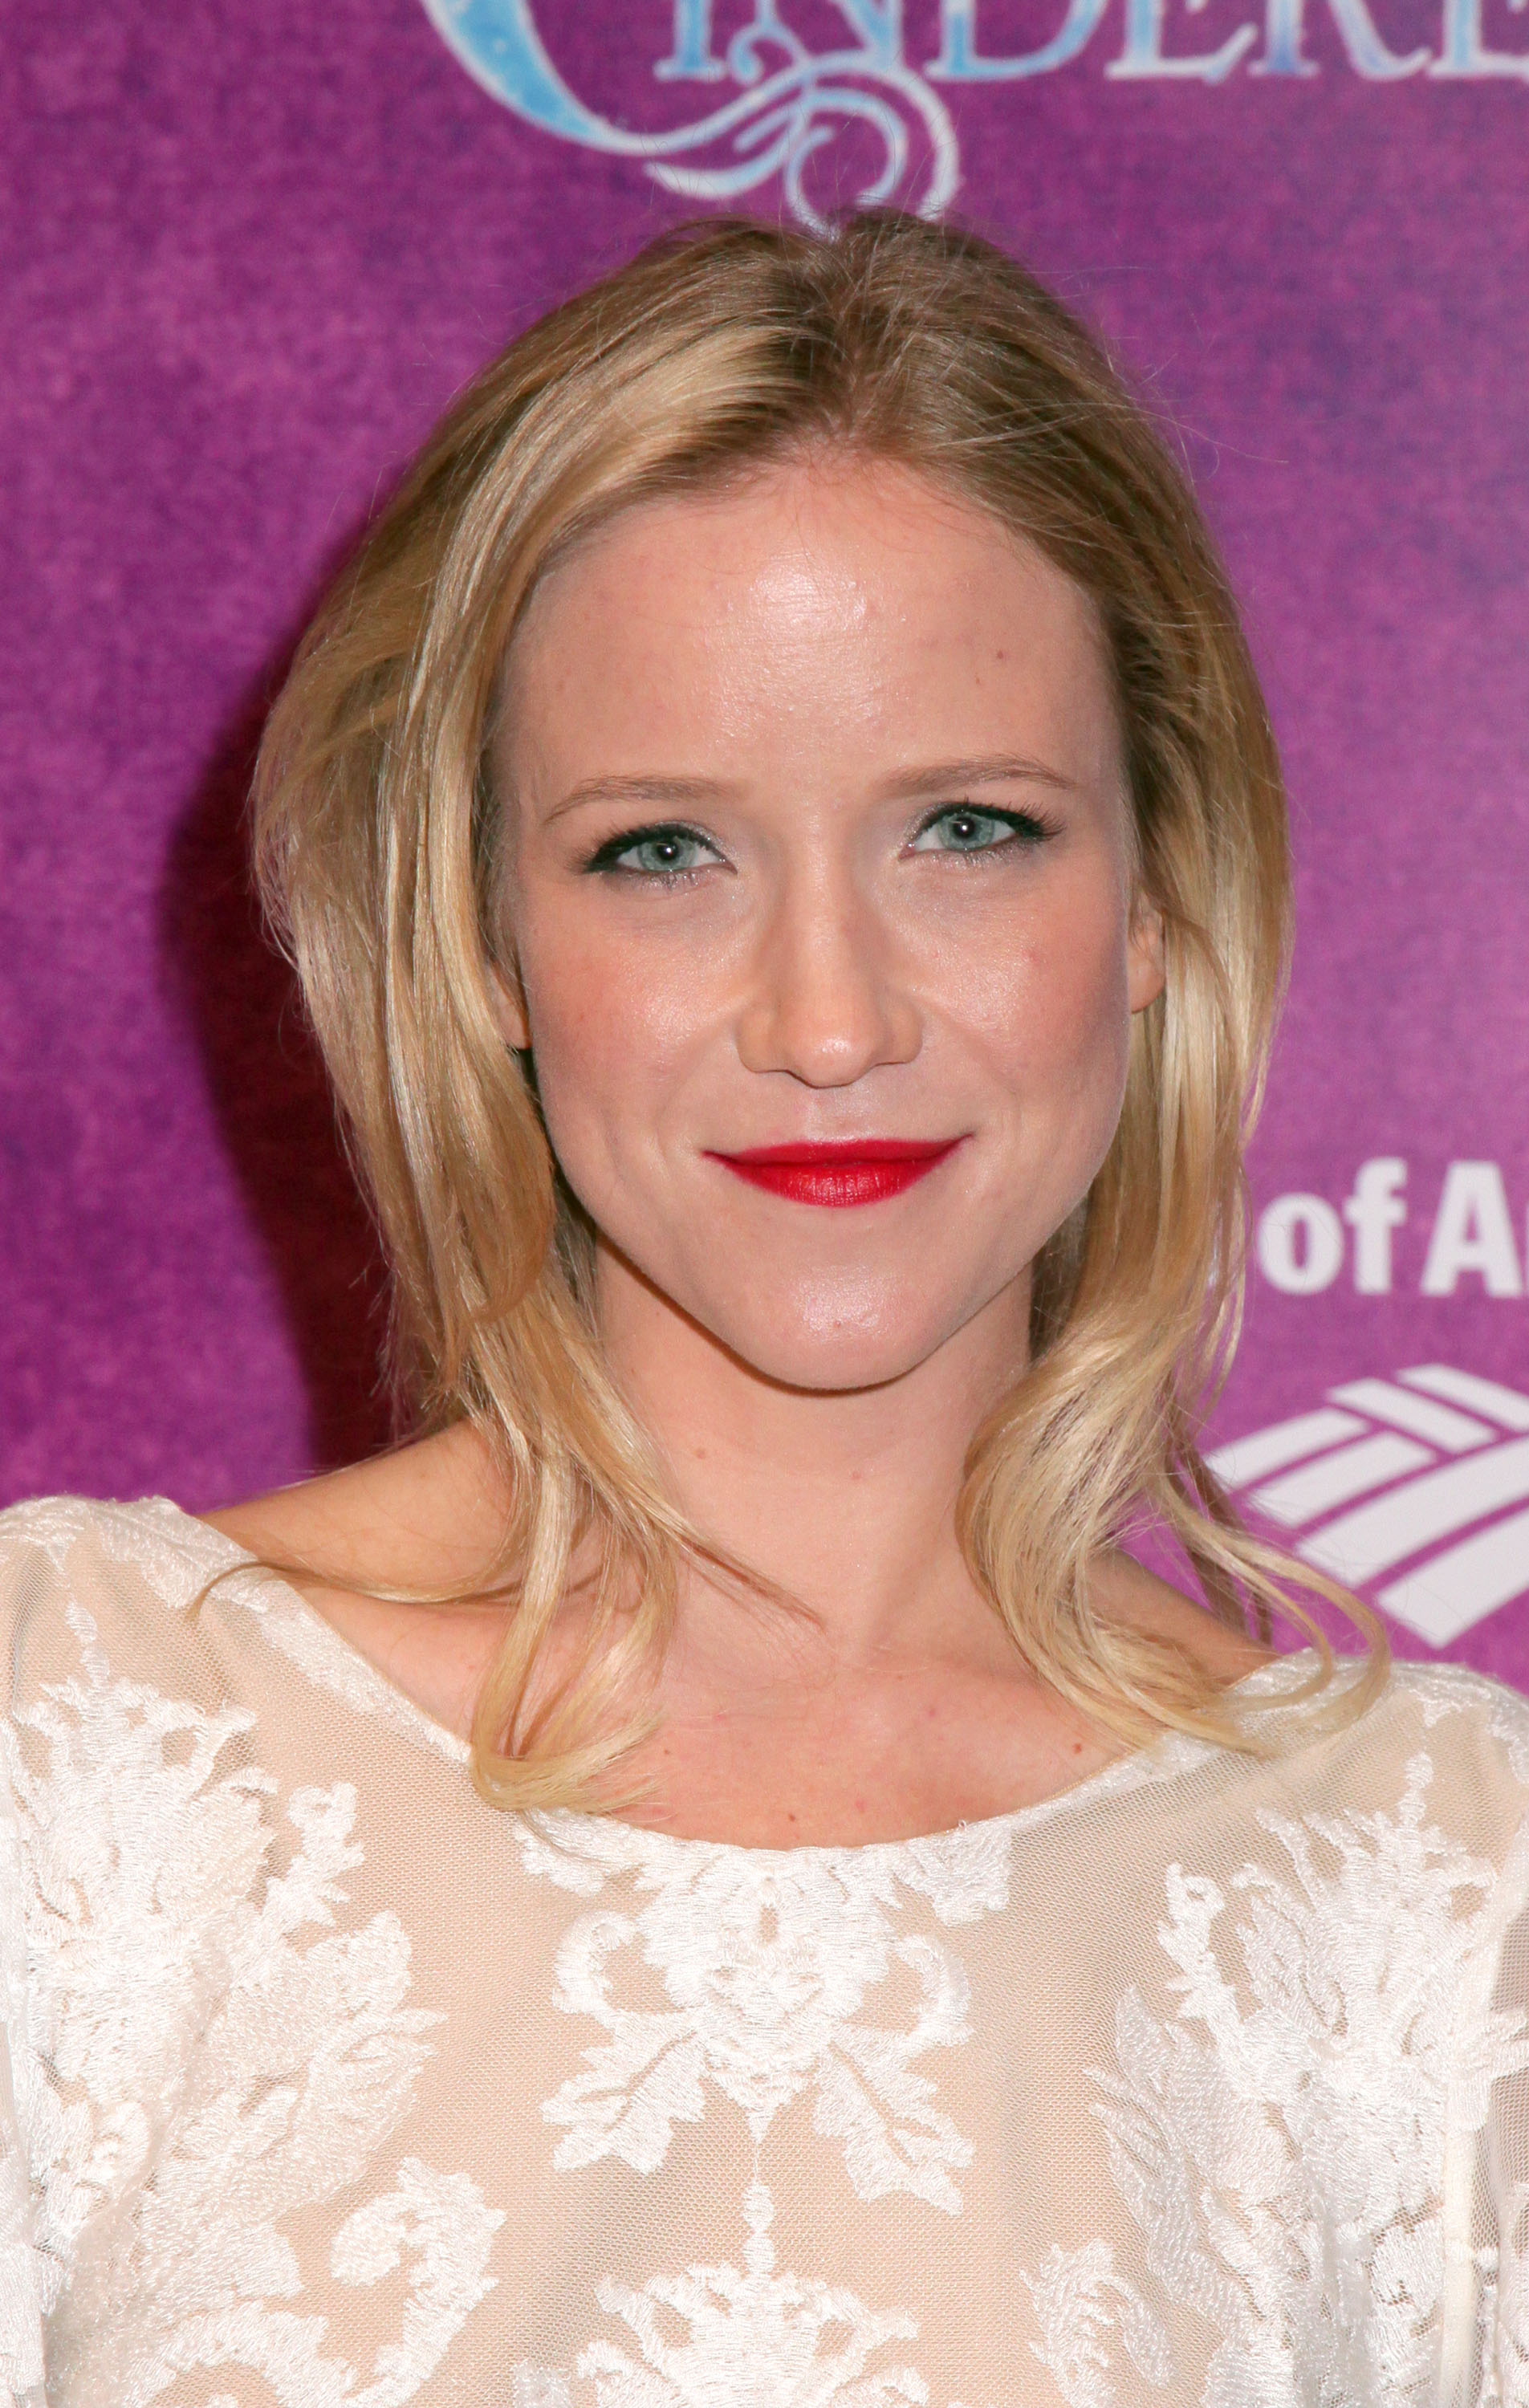 Actress JessySchram at Ahmanson Theatre on March 18, 2015 in Los Angeles, California. | Source: Getty Images